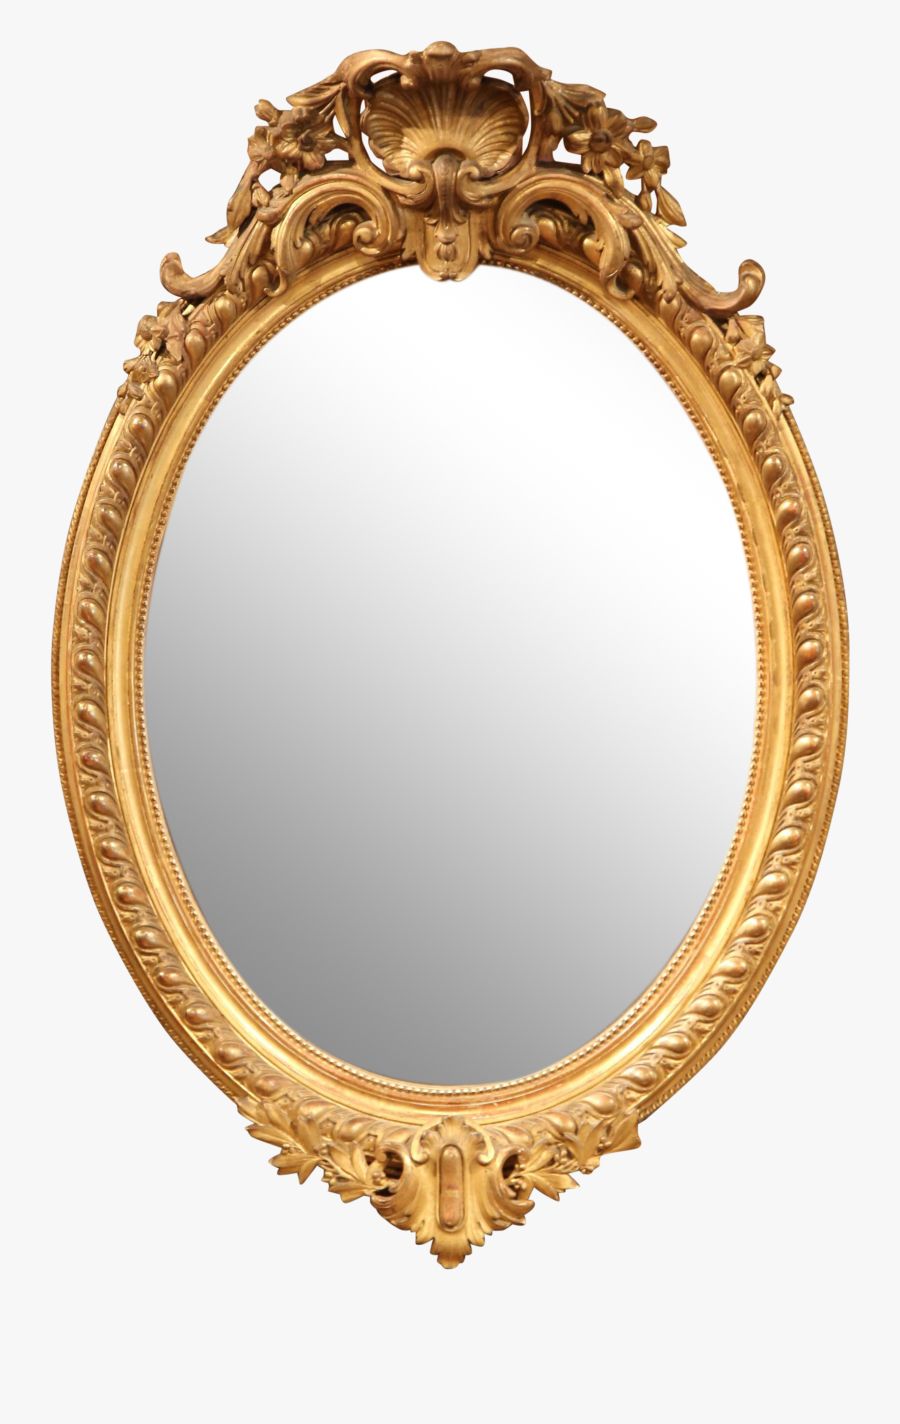 Transparent Mirror Clip Art – Oval Gold Leaf Mirror , Free Transparent With Regard To Ring Shield Gold Leaf Wall Mirrors (View 7 of 15)